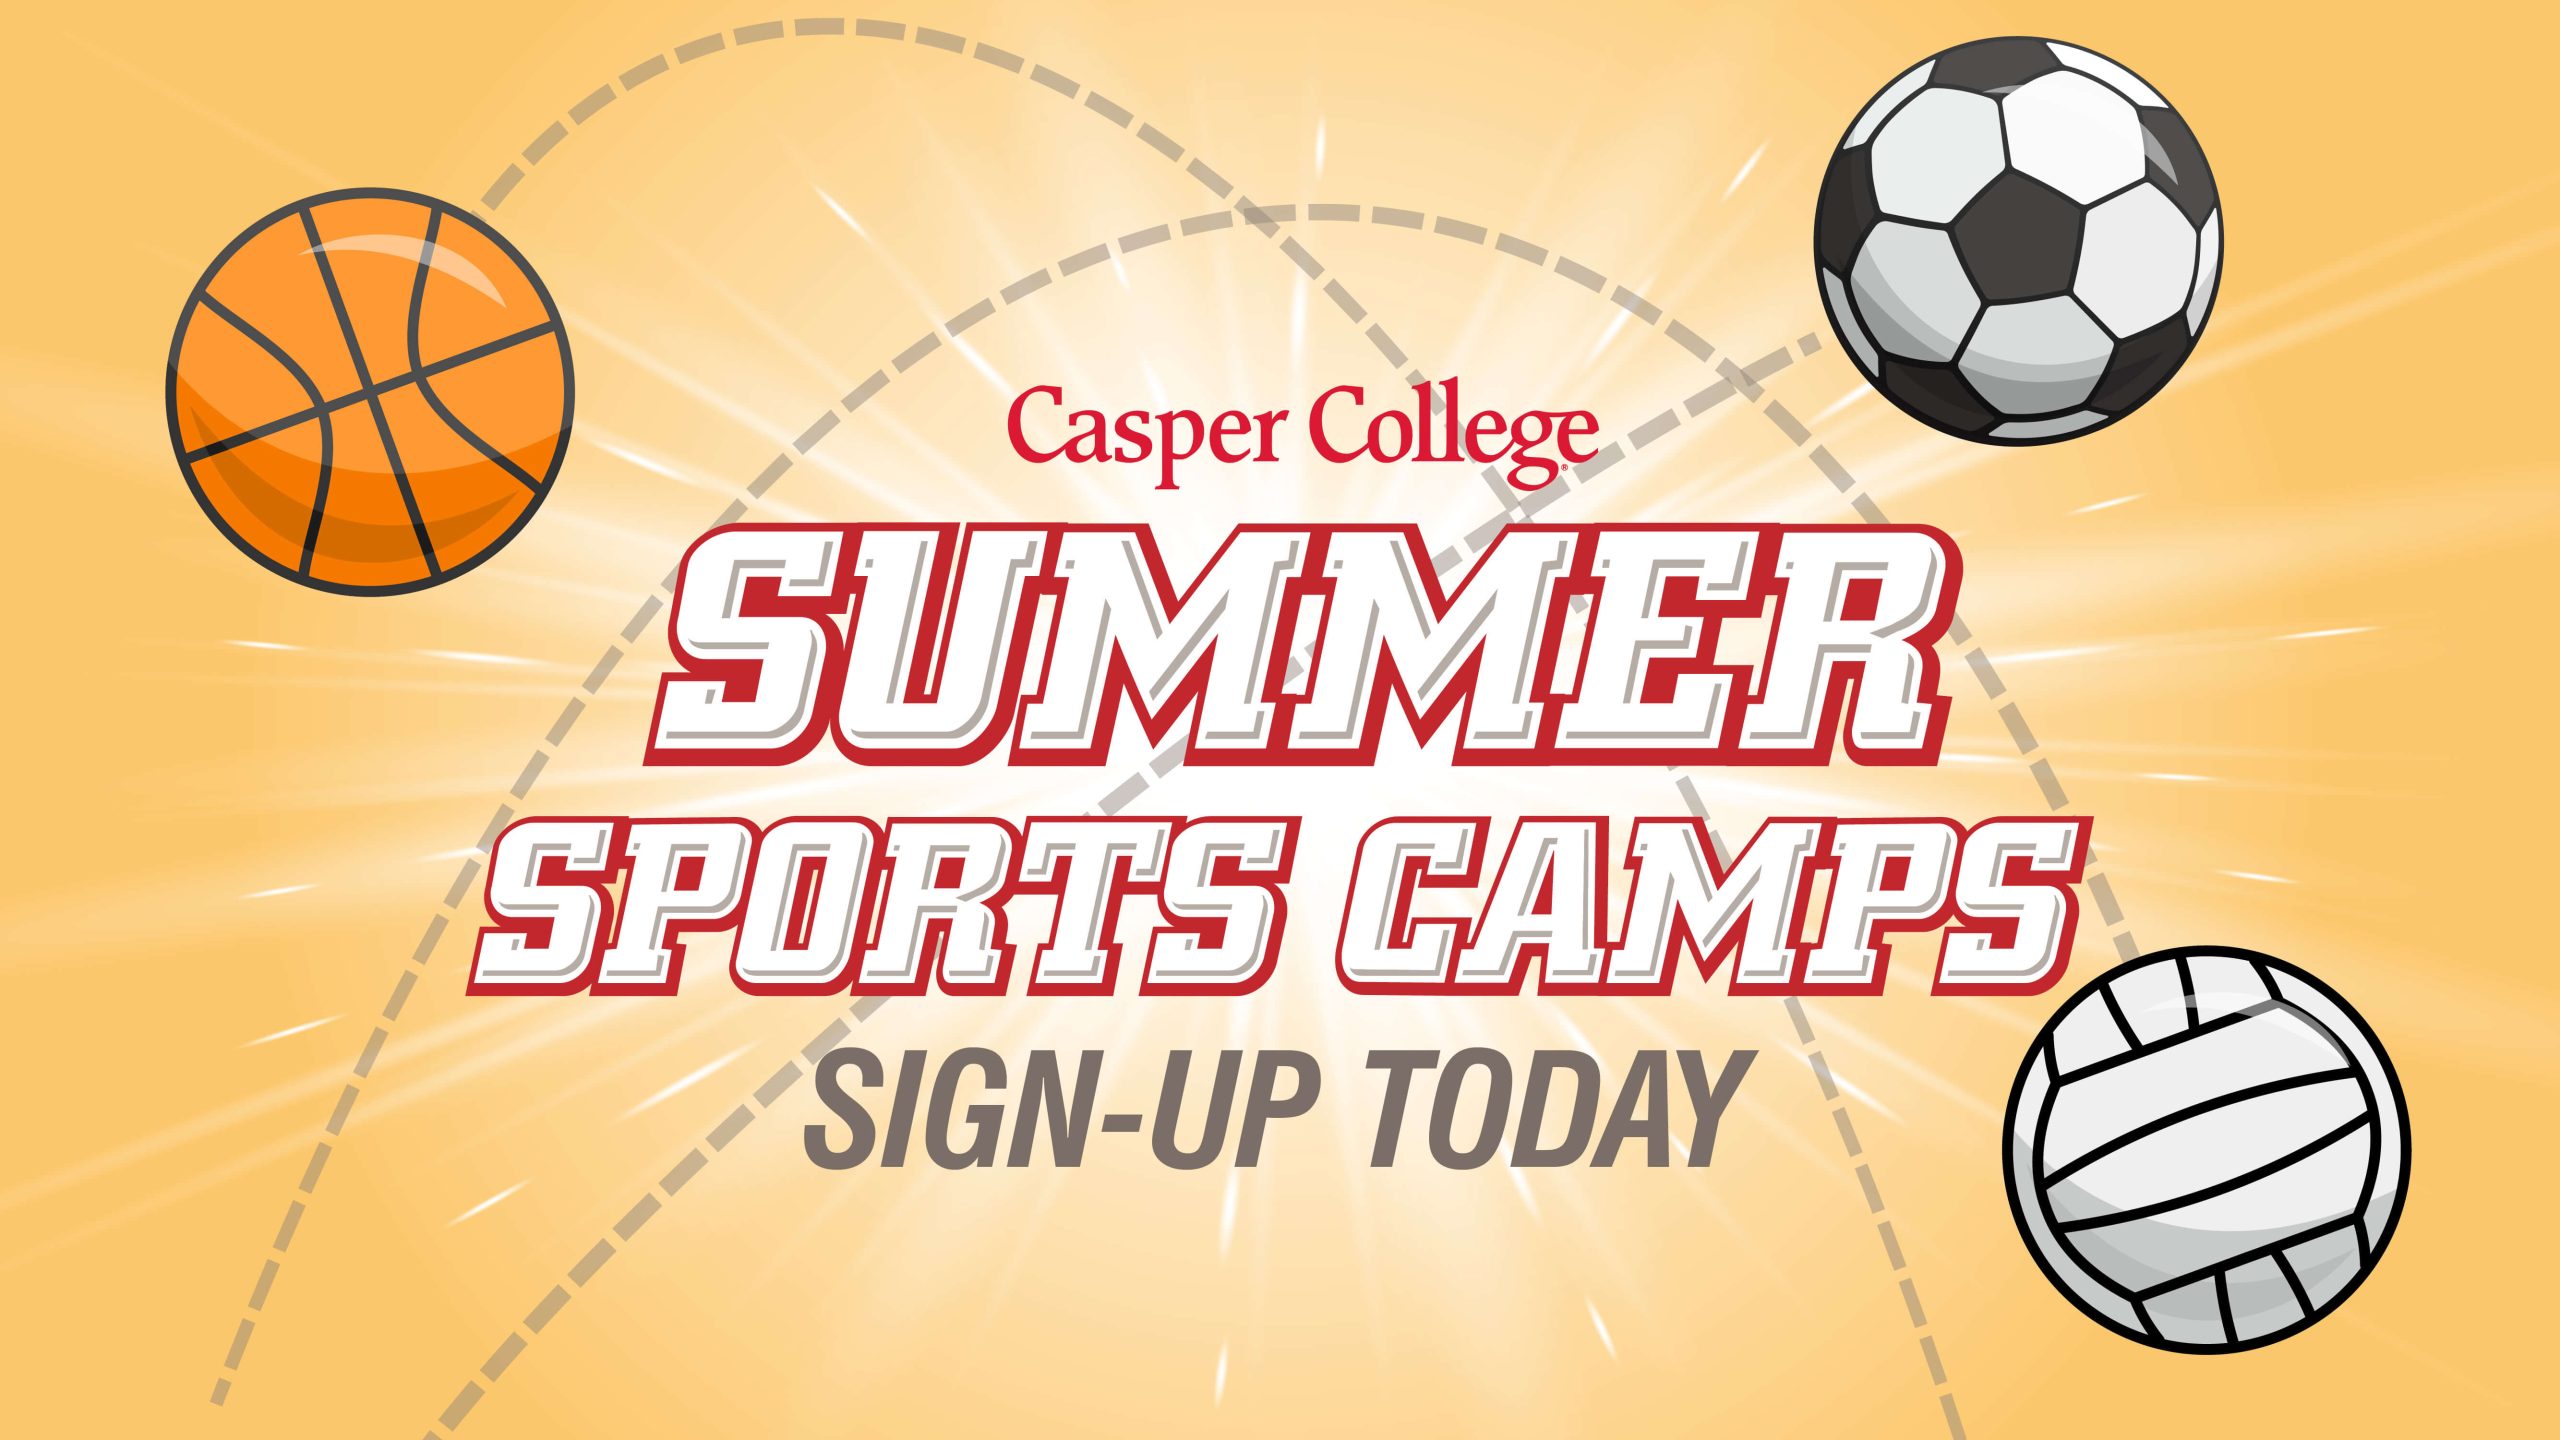 Image for summer athletic camps.